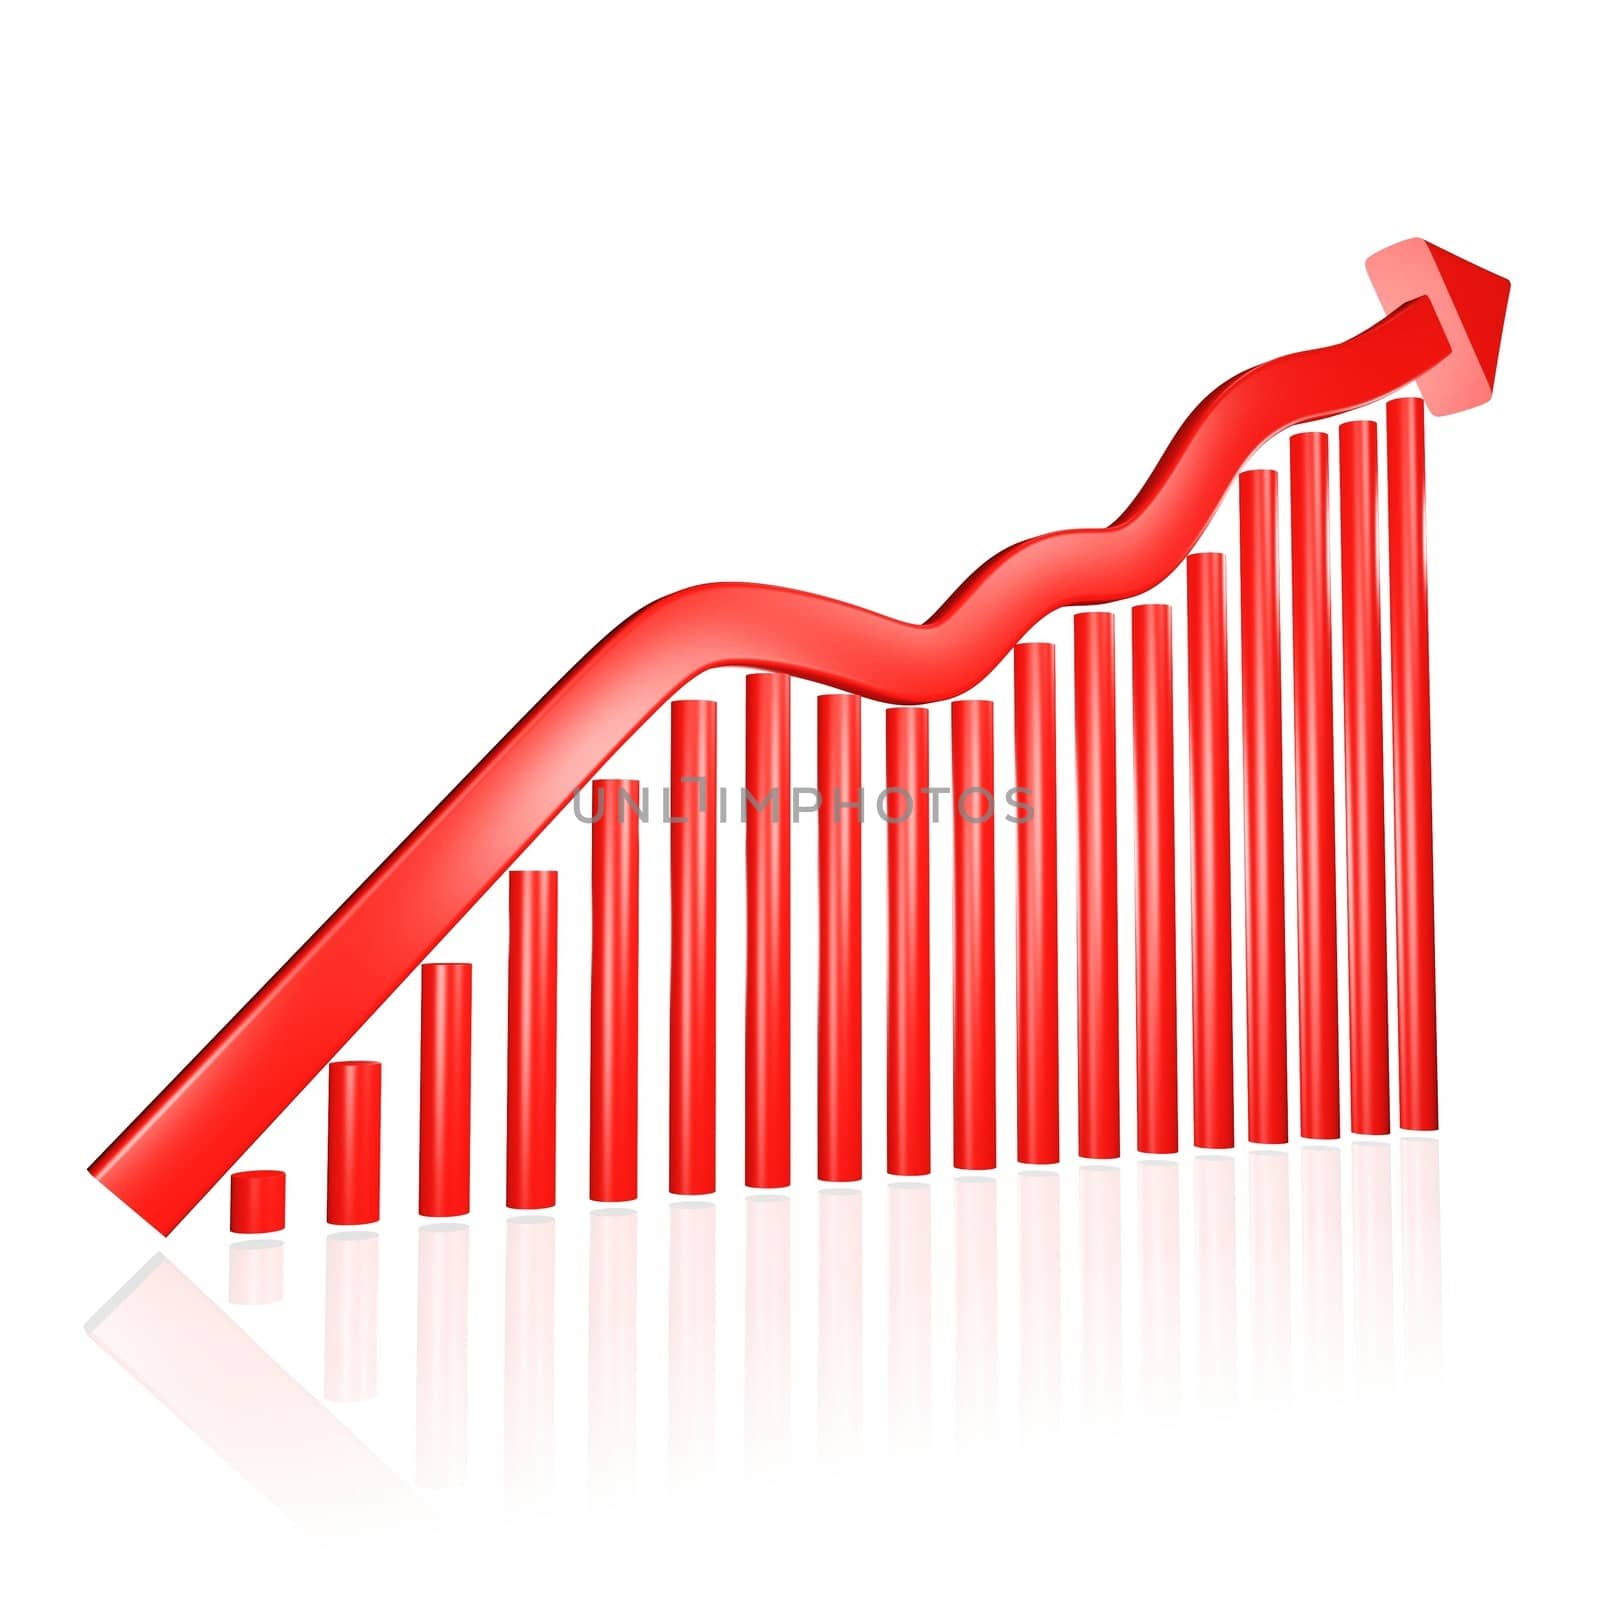 Upward business growth illustrated with an upward rising red arrow on a bar graph
